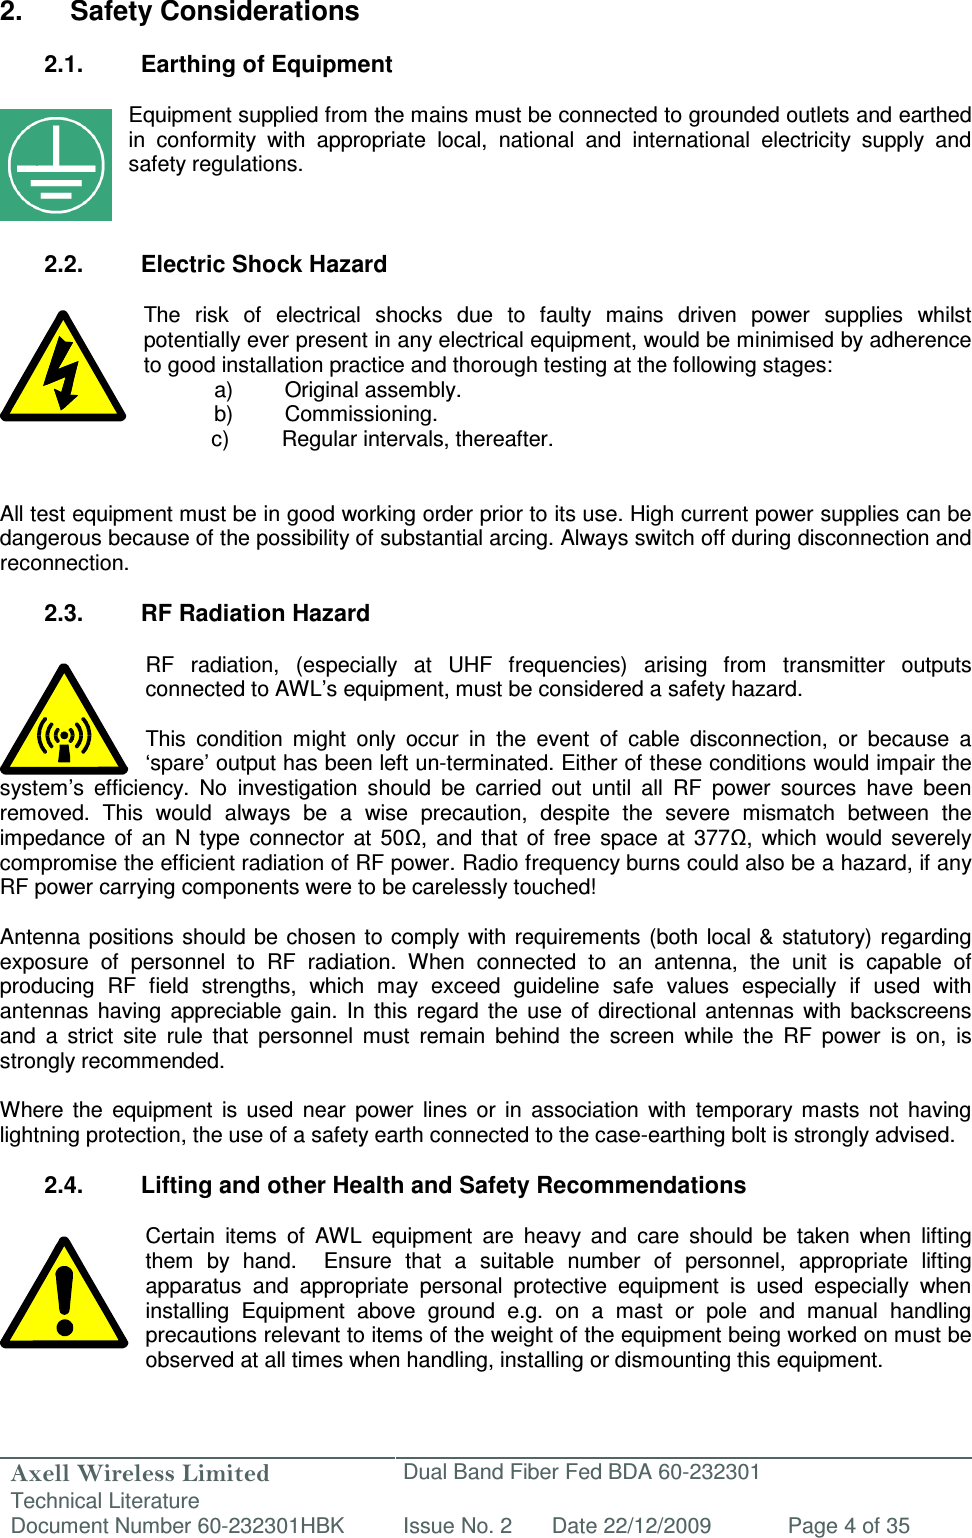 Axell Wireless Limited Technical Literature Dual Band Fiber Fed BDA 60-232301 Document Number 60-232301HBK Issue No. 2 Date 22/12/2009 Page 4 of 35   2.  Safety Considerations  2.1.  Earthing of Equipment  Equipment supplied from the mains must be connected to grounded outlets and earthed in  conformity  with  appropriate  local,  national  and  international  electricity  supply  and safety regulations.    2.2.  Electric Shock Hazard  The  risk  of  electrical  shocks  due  to  faulty  mains  driven  power  supplies  whilst potentially ever present in any electrical equipment, would be minimised by adherence to good installation practice and thorough testing at the following stages:   a)  Original assembly.   b)  Commissioning.       c)  Regular intervals, thereafter.   All test equipment must be in good working order prior to its use. High current power supplies can be dangerous because of the possibility of substantial arcing. Always switch off during disconnection and reconnection.  2.3.  RF Radiation Hazard  RF  radiation,  (especially  at  UHF  frequencies)  arising  from  transmitter  outputs connected to AWL’s equipment, must be considered a safety hazard.  This  condition  might  only  occur  in  the  event  of  cable  disconnection,  or  because  a ‘spare’ output has been left un-terminated. Either of these conditions would impair the system’s  efficiency.  No  investigation  should  be  carried  out  until  all  RF  power  sources  have  been removed.  This  would  always  be  a  wise  precaution,  despite  the  severe  mismatch  between  the impedance  of  an  N  type  connector  at  50Ω,  and that  of  free  space  at  377Ω,  which  would  severely compromise the efficient radiation of RF power. Radio frequency burns could also be a hazard, if any RF power carrying components were to be carelessly touched!  Antenna  positions should be chosen  to  comply with requirements  (both local &amp;  statutory) regarding exposure  of  personnel  to  RF  radiation.  When  connected  to  an  antenna,  the  unit  is  capable  of producing  RF  field  strengths,  which  may  exceed  guideline  safe  values  especially  if  used  with antennas  having  appreciable  gain.  In  this  regard  the  use  of  directional  antennas  with  backscreens and  a  strict  site  rule  that  personnel  must  remain  behind  the  screen  while  the  RF  power  is  on,  is strongly recommended.  Where  the  equipment  is  used  near  power  lines  or  in  association  with  temporary  masts  not  having lightning protection, the use of a safety earth connected to the case-earthing bolt is strongly advised.  2.4.  Lifting and other Health and Safety Recommendations  Certain  items  of  AWL  equipment  are  heavy  and  care  should  be  taken  when  lifting them  by  hand.    Ensure  that  a  suitable  number  of  personnel,  appropriate  lifting apparatus  and  appropriate  personal  protective  equipment  is  used  especially  when installing  Equipment  above  ground  e.g.  on  a  mast  or  pole  and  manual  handling precautions relevant to items of the weight of the equipment being worked on must be observed at all times when handling, installing or dismounting this equipment.   